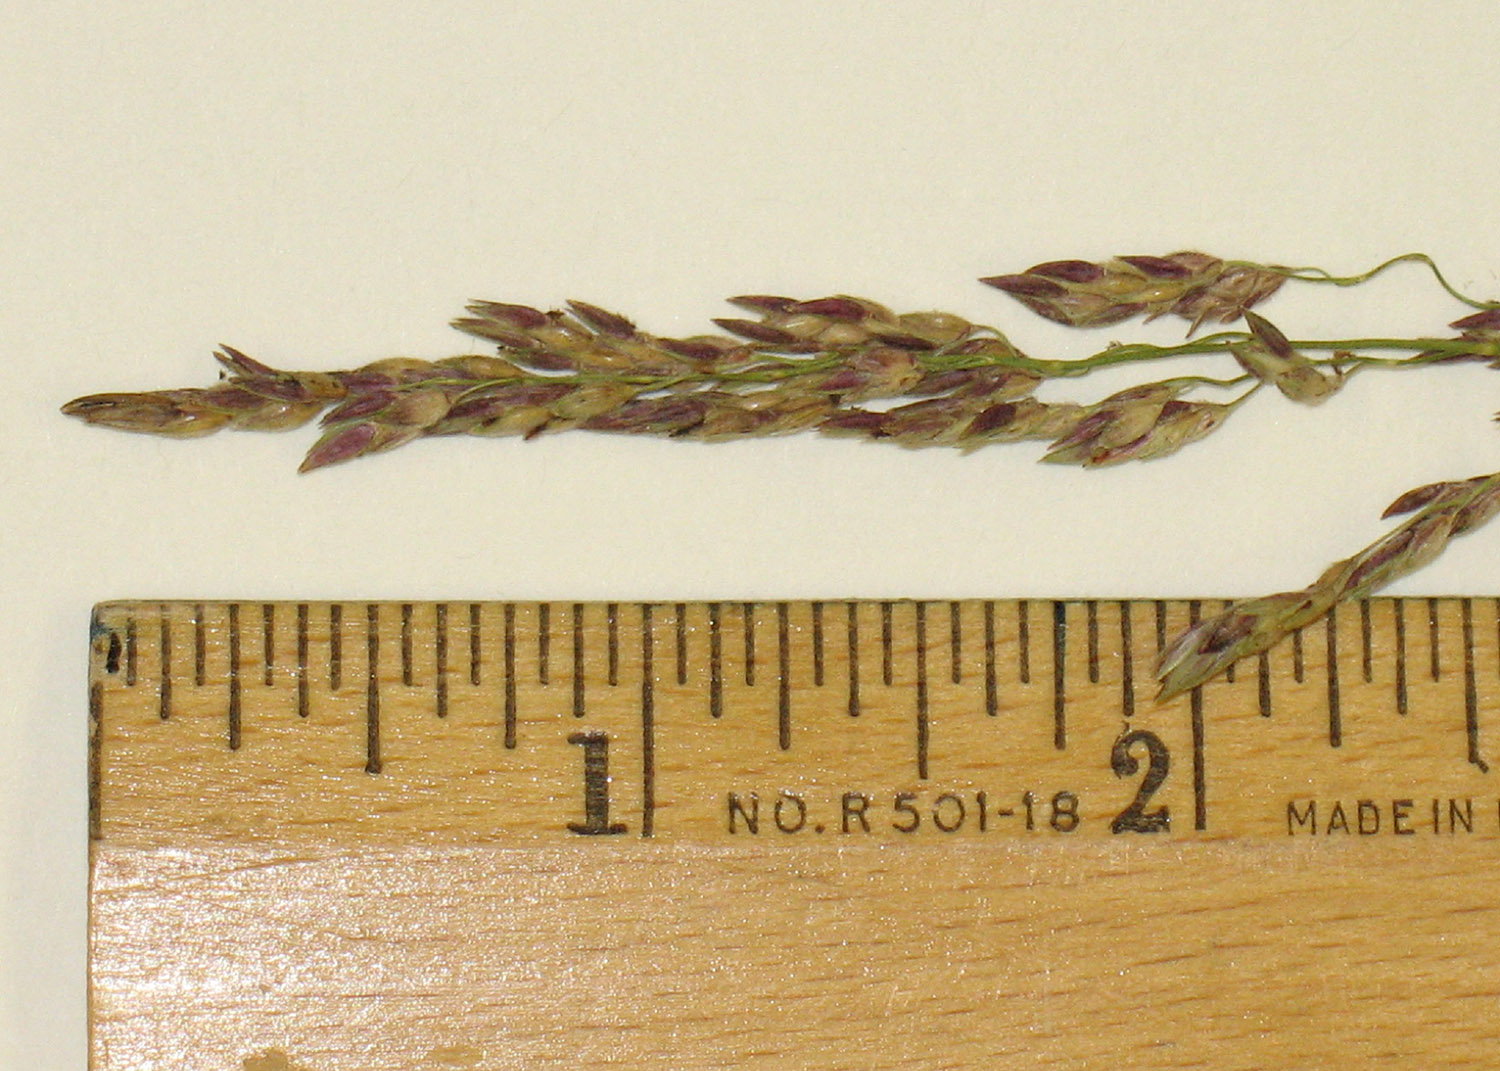 Johnsongrass spikelets have short pedicels with fine hairs.